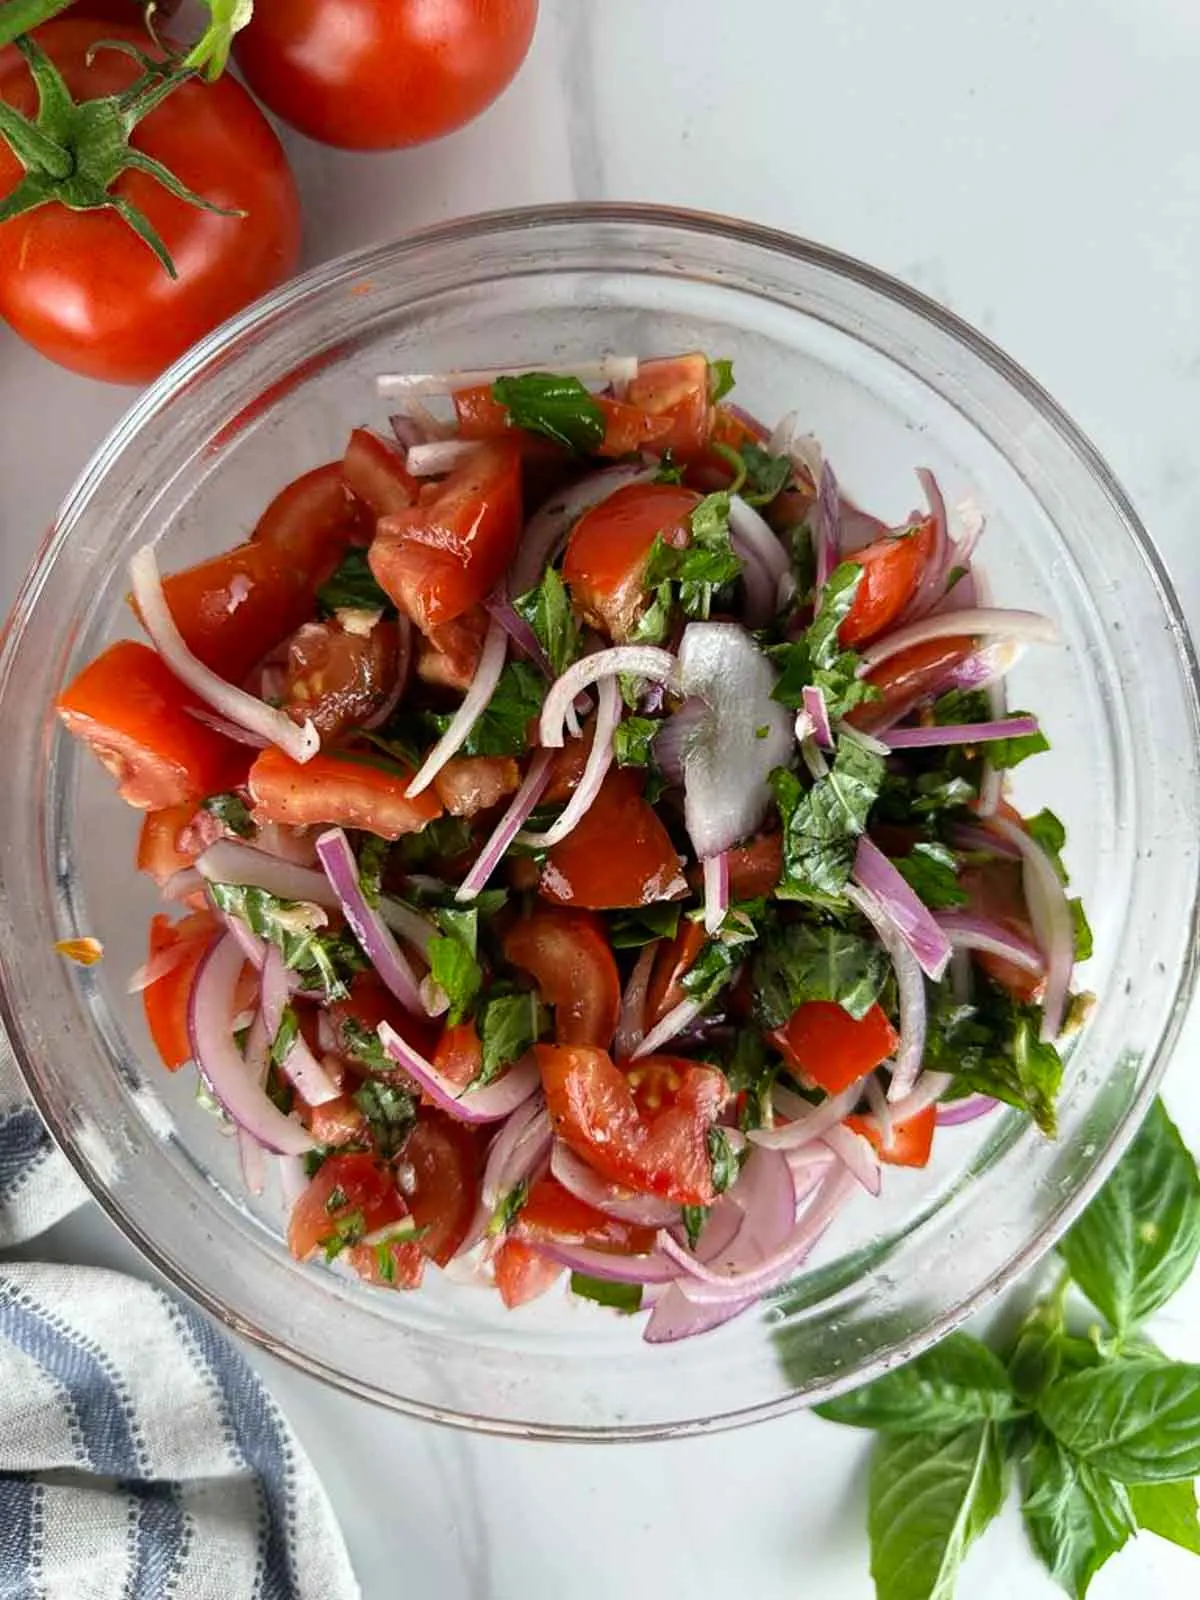 Toss the tomato and onion salad with vinegar dressing until everything is evenly coated.